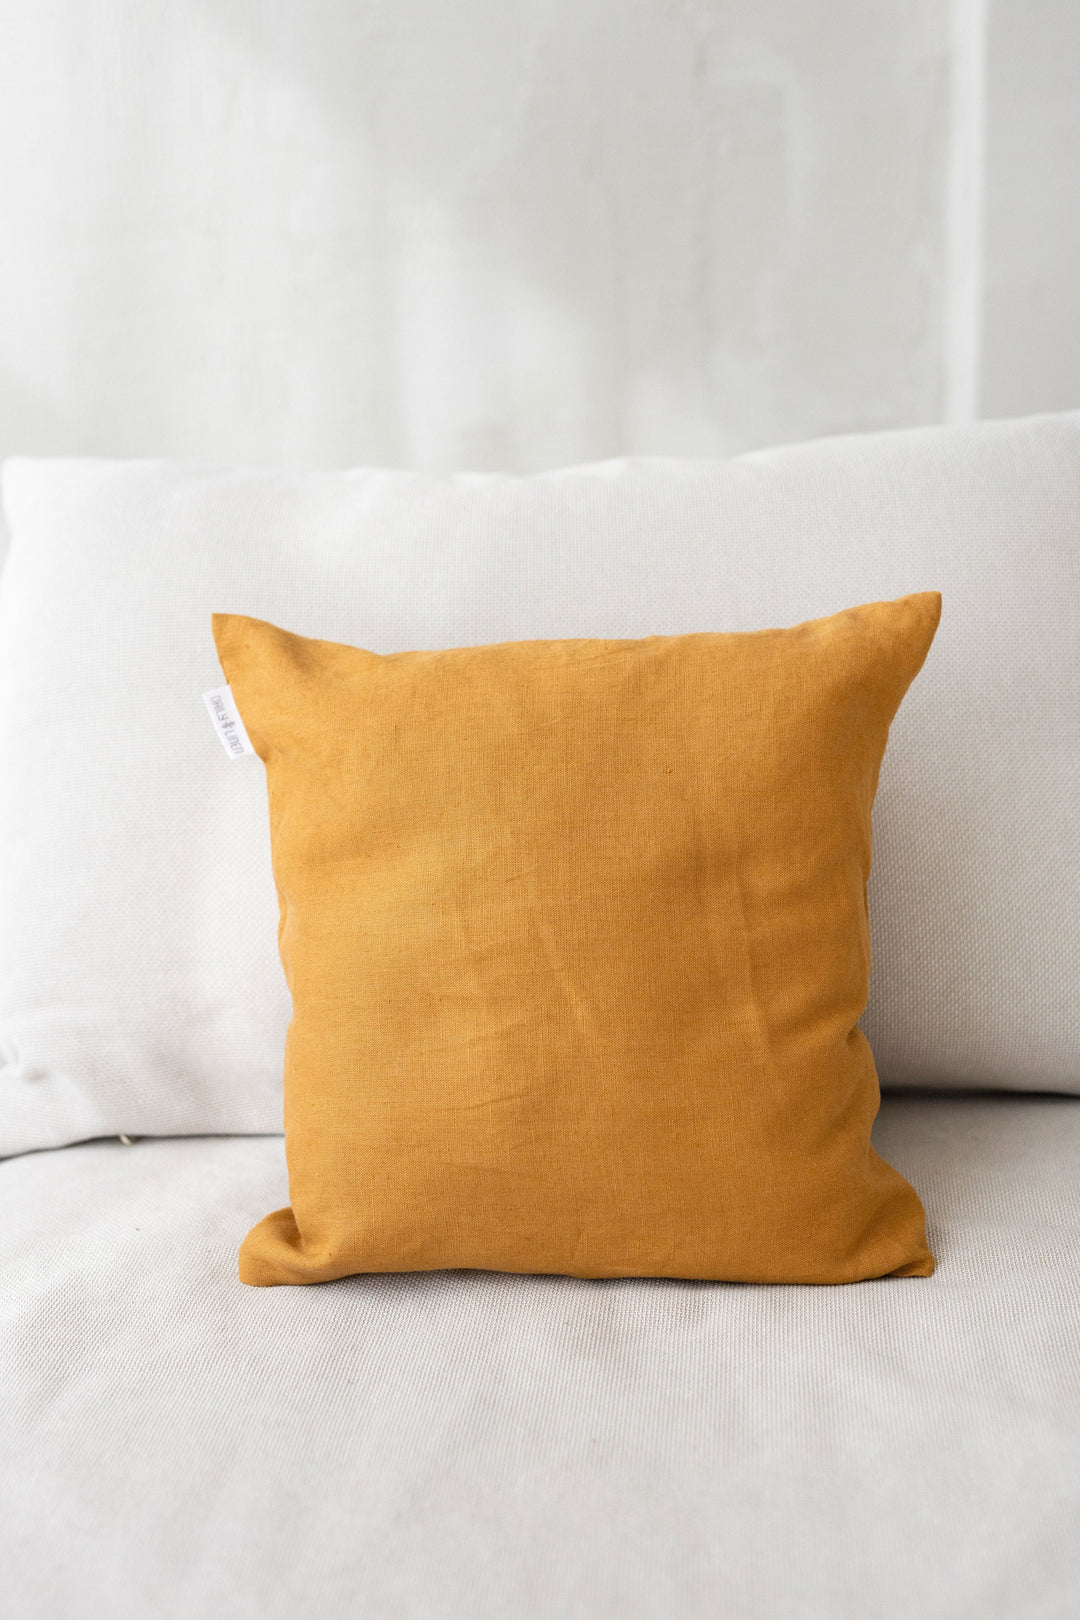 Deco Pillow Linen Cover In Amber Yellow Color - Daily Linen